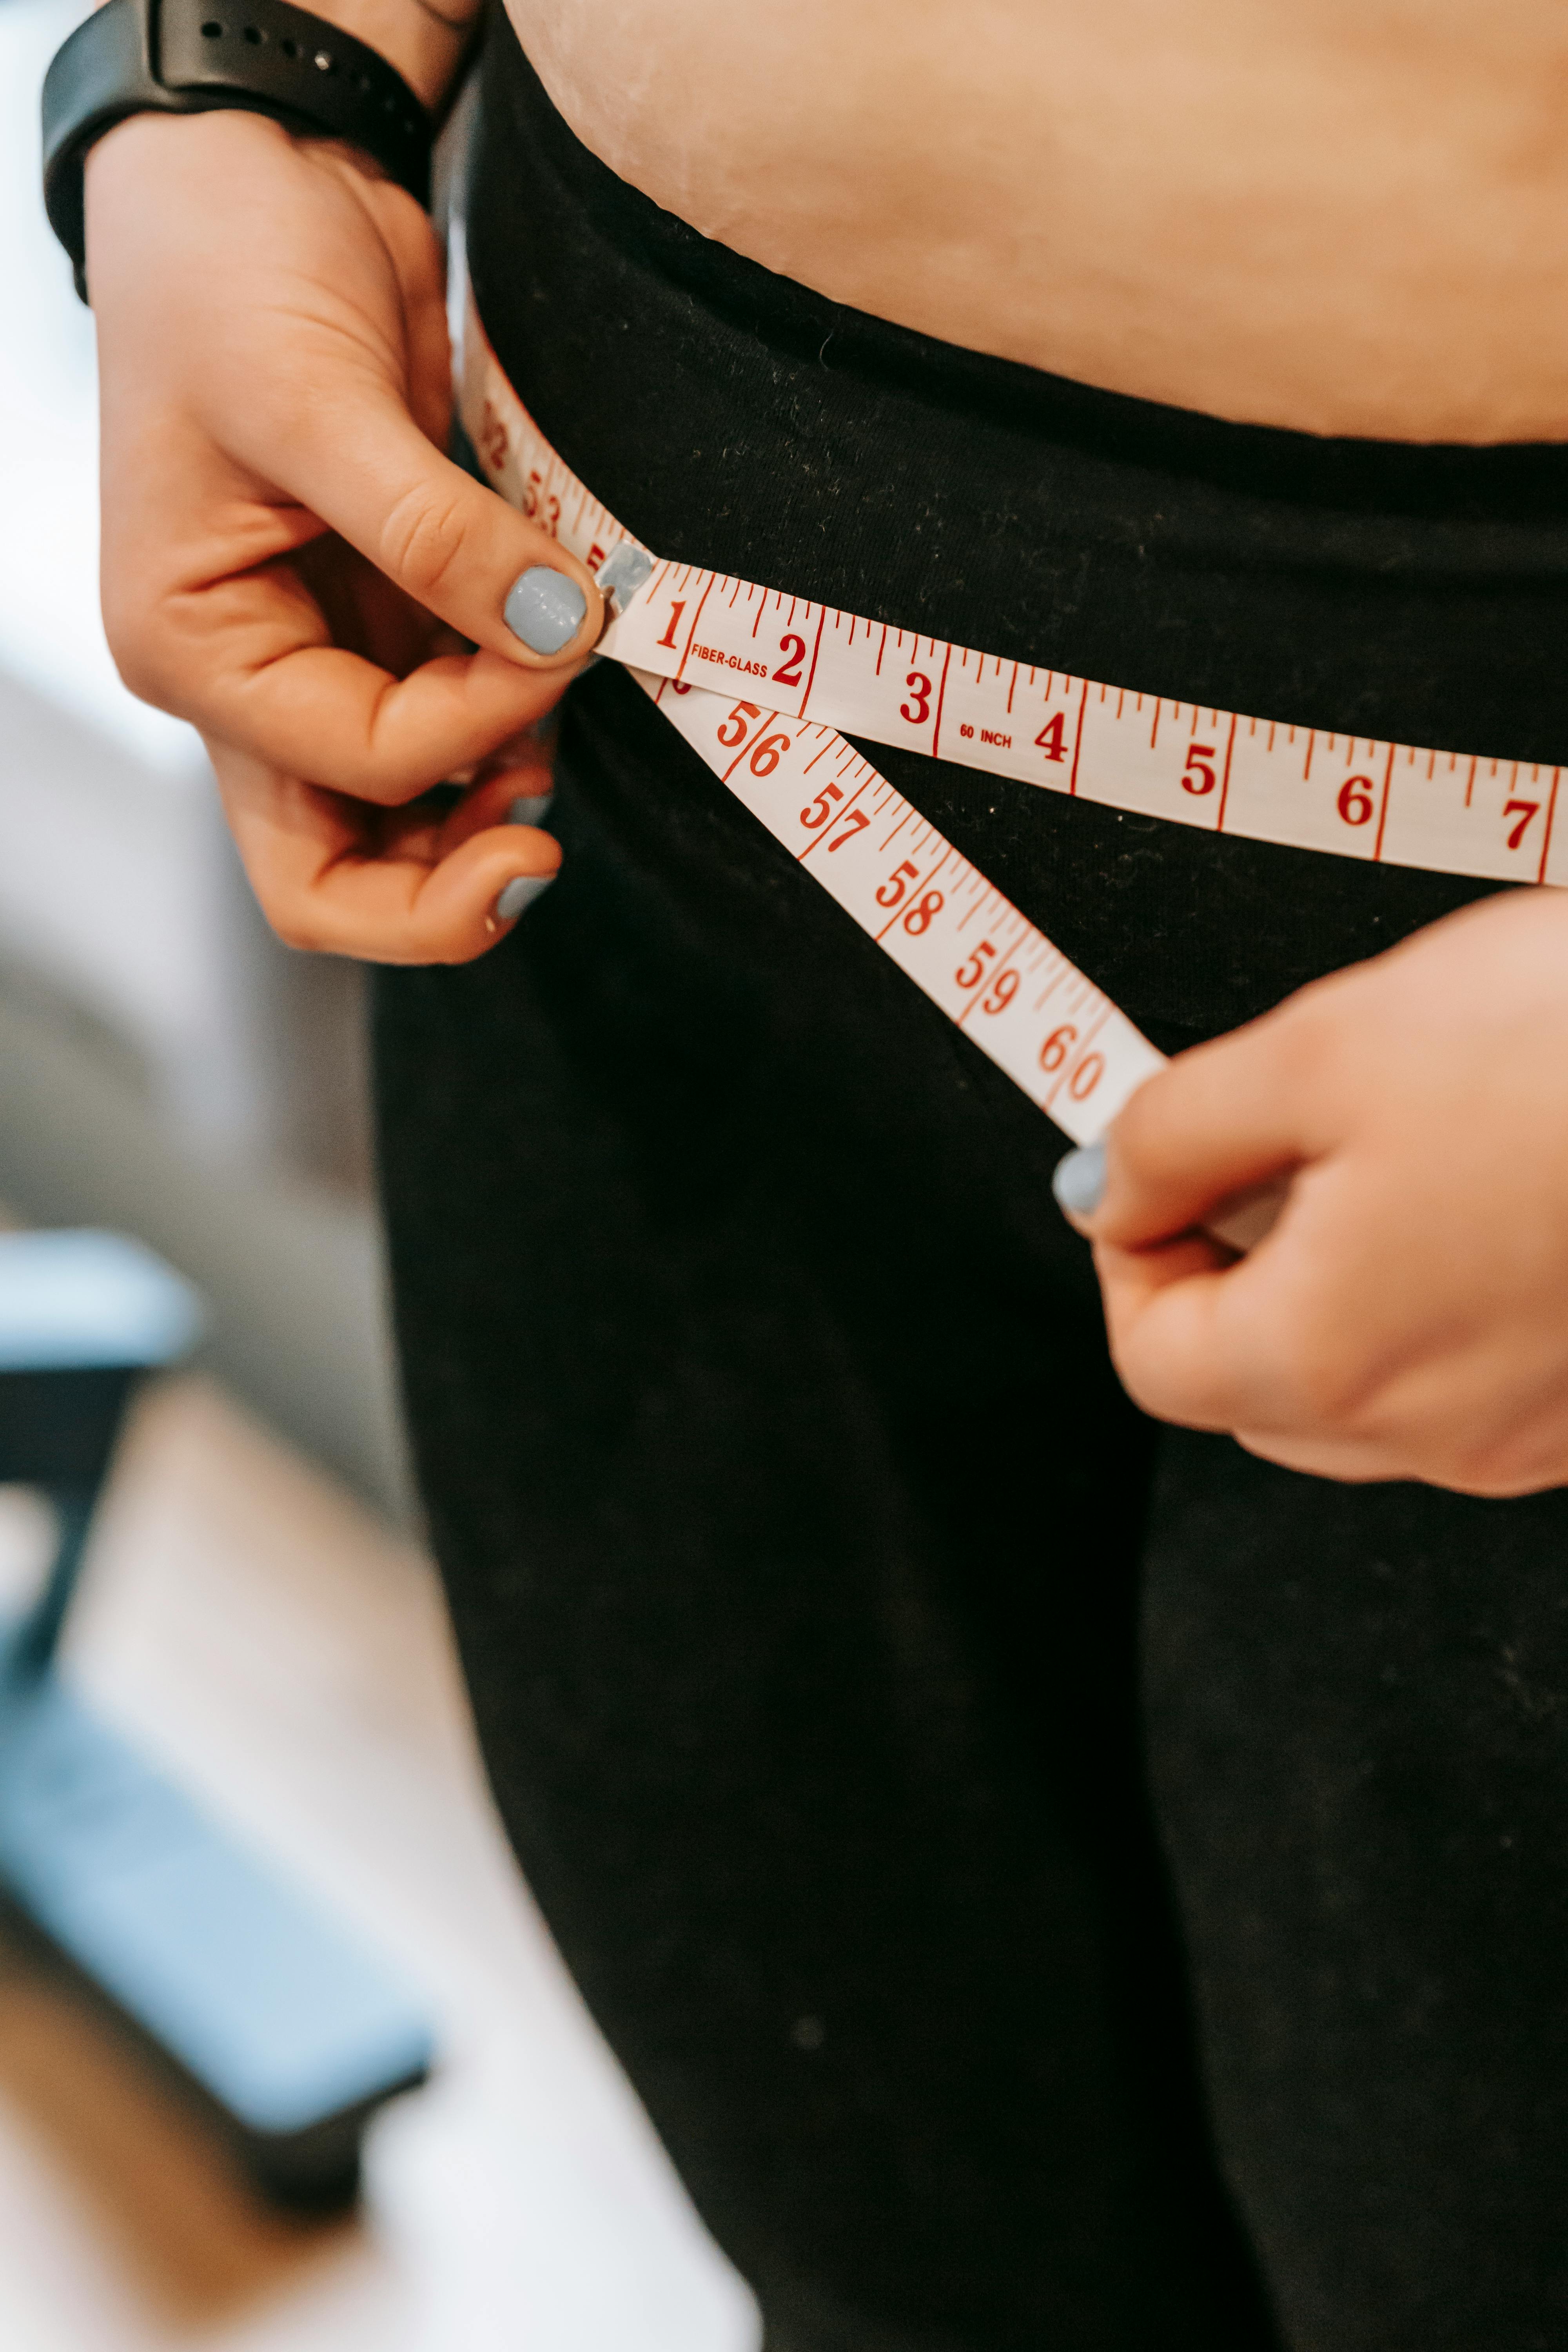 Could I get a professional weight loss consultation in Palmetto for Ozempipc?